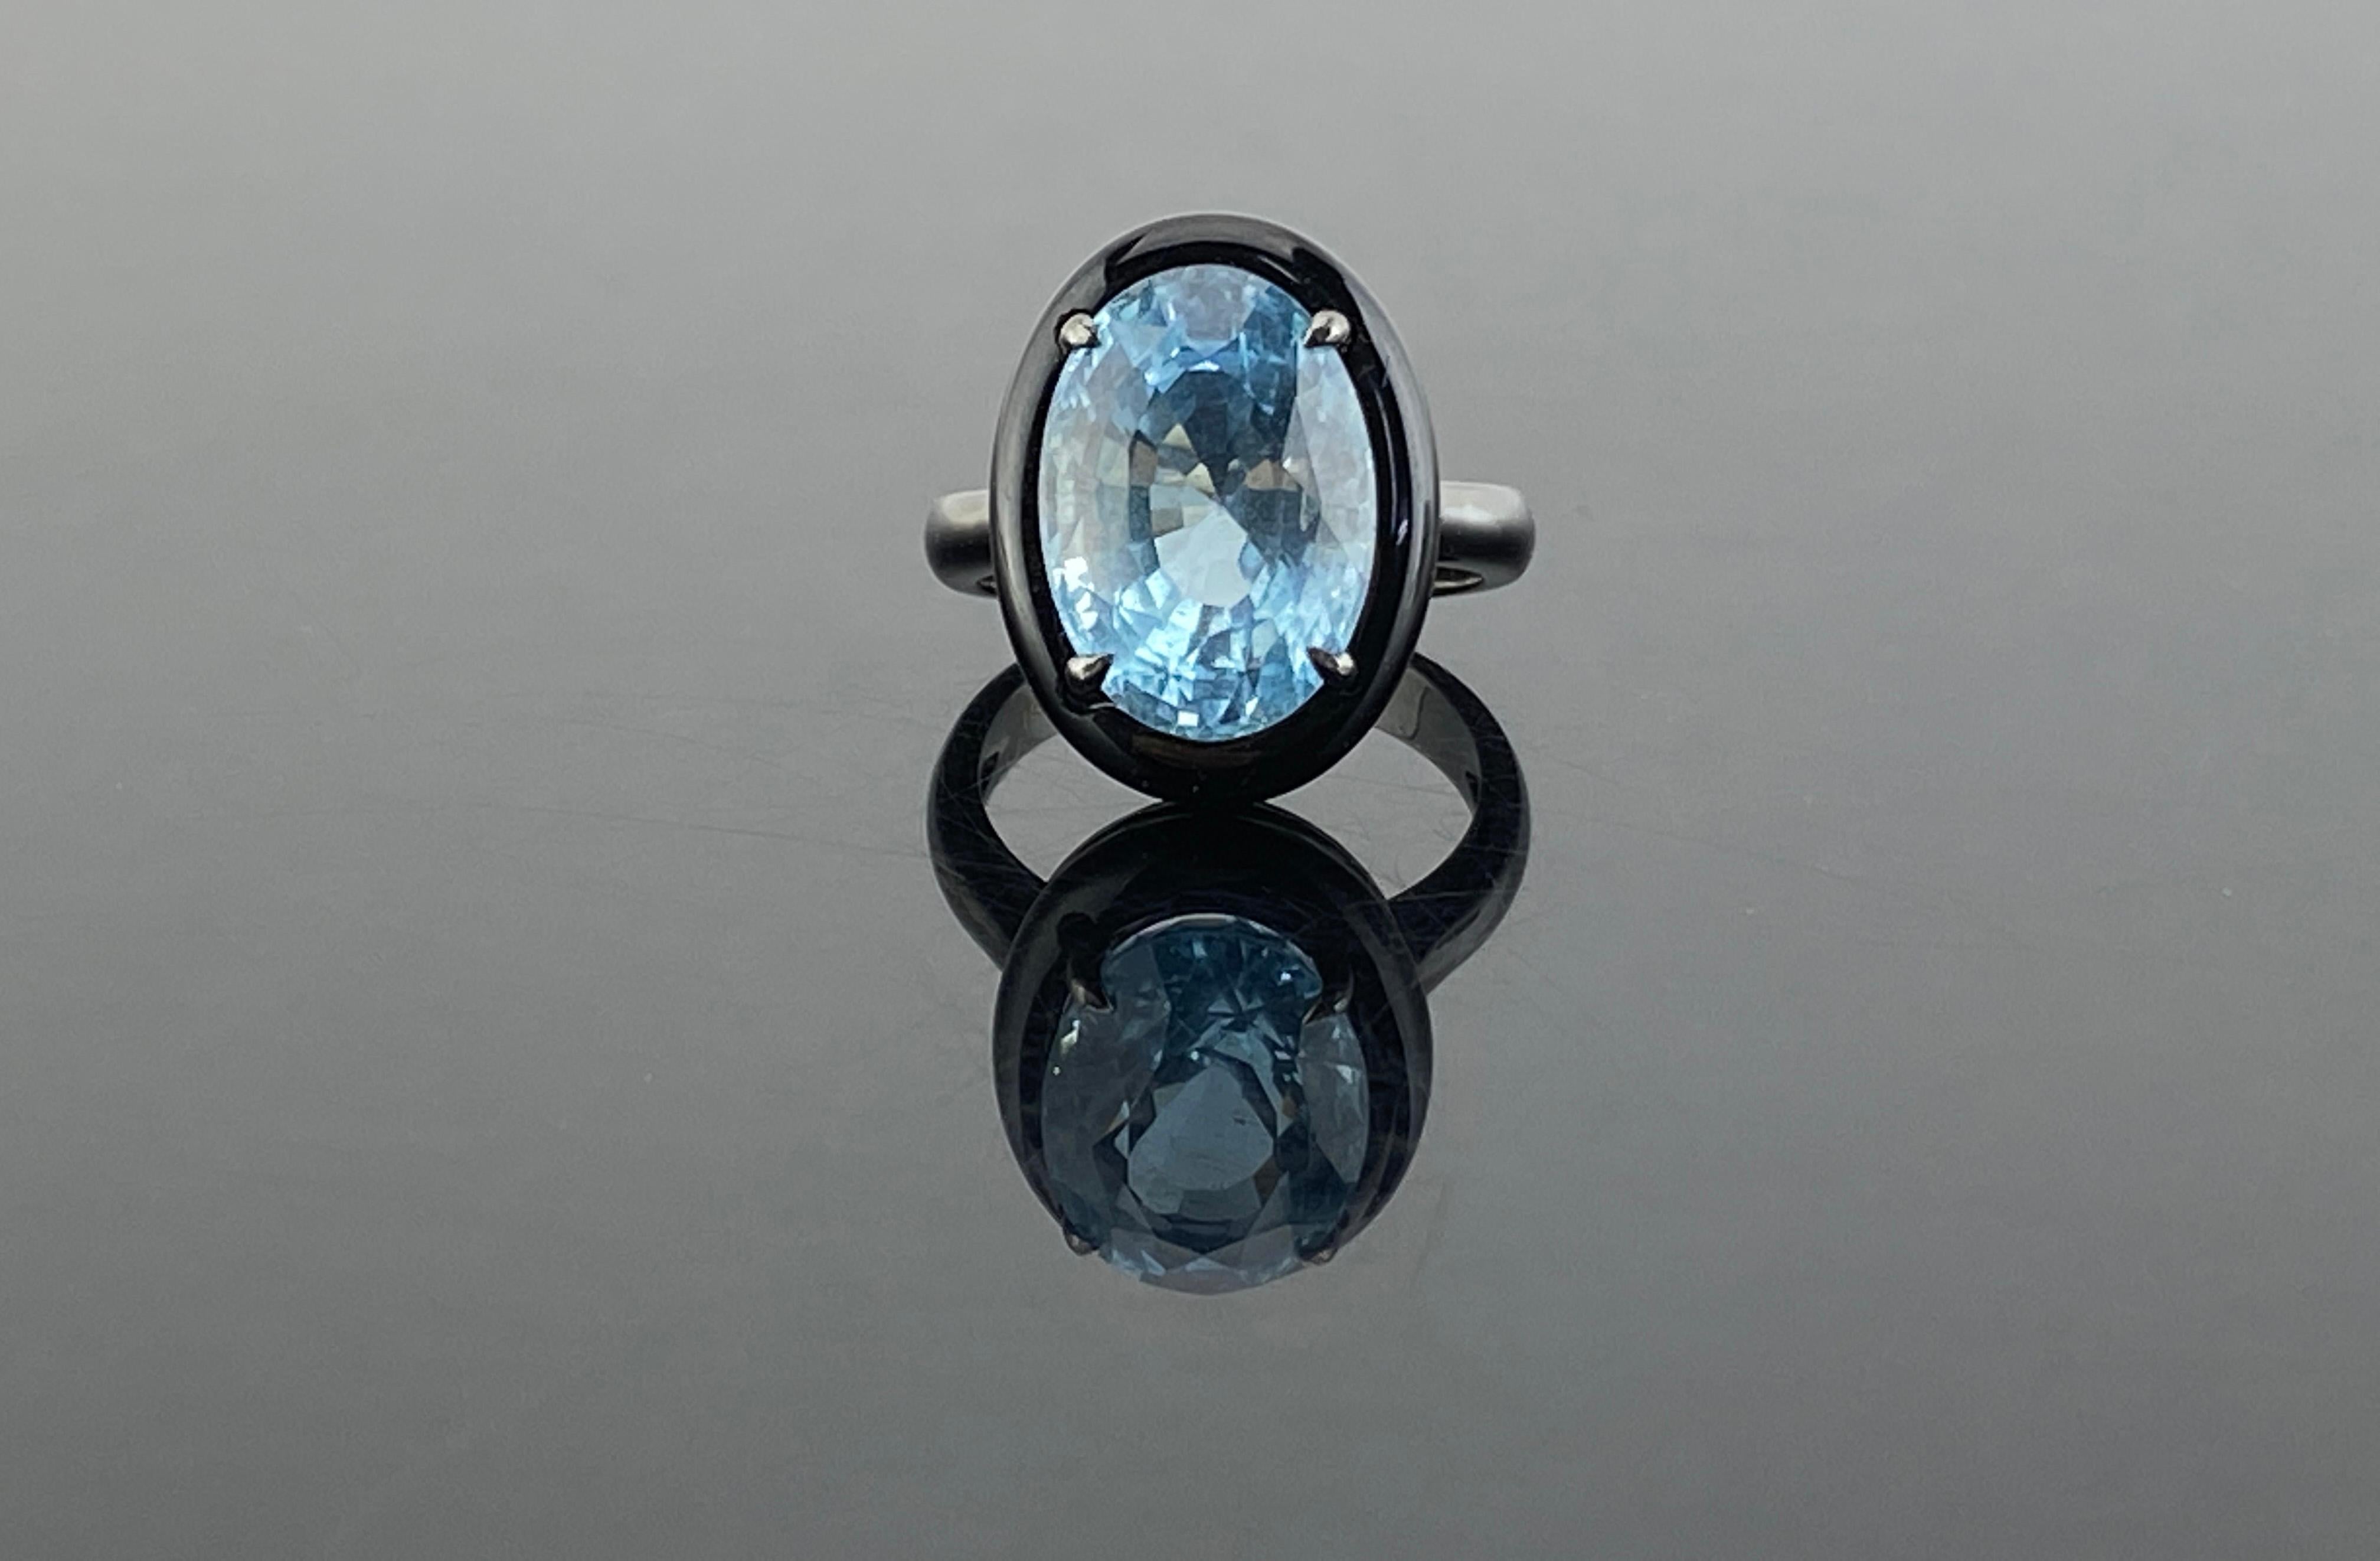 A stylish and classy ring, featuring a 7.76 carat aquamarine with a lovely sea-blue color. It is complemented by a piece of hand carved black onyx around it to give it a contrasting look  . Hand-fabricated in 18K gold and polished in black rodium .